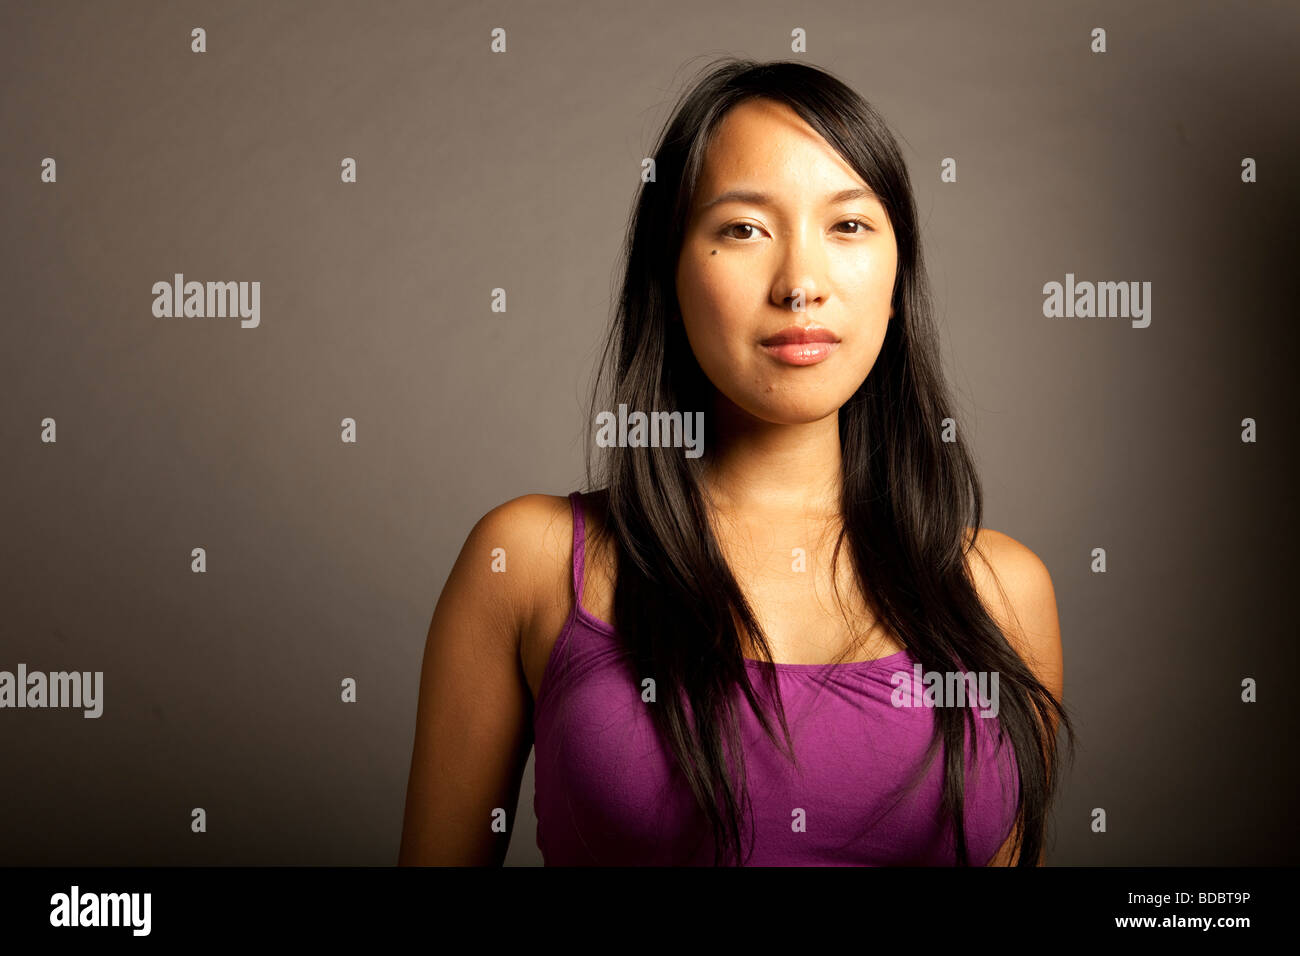 Portrtait of Filipina female wearing purple blouse against gray background, serious expression. Stock Photo